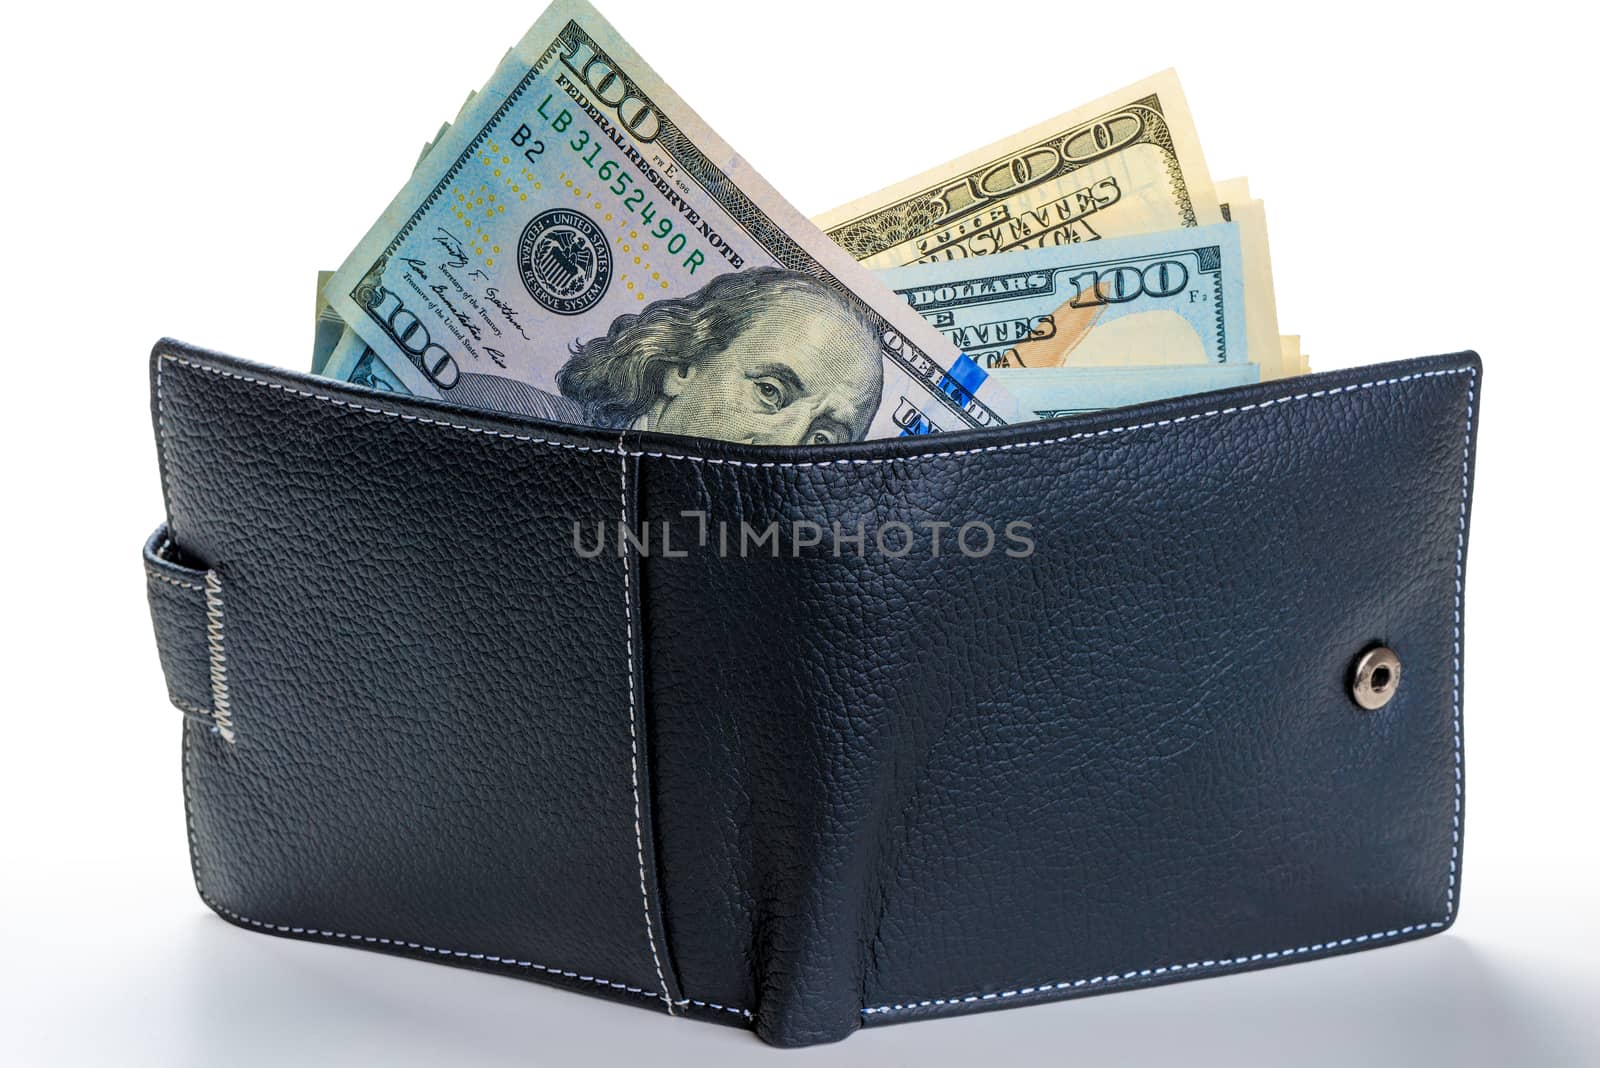 American dollars sticking out of a leather wallet full of money by kosmsos111